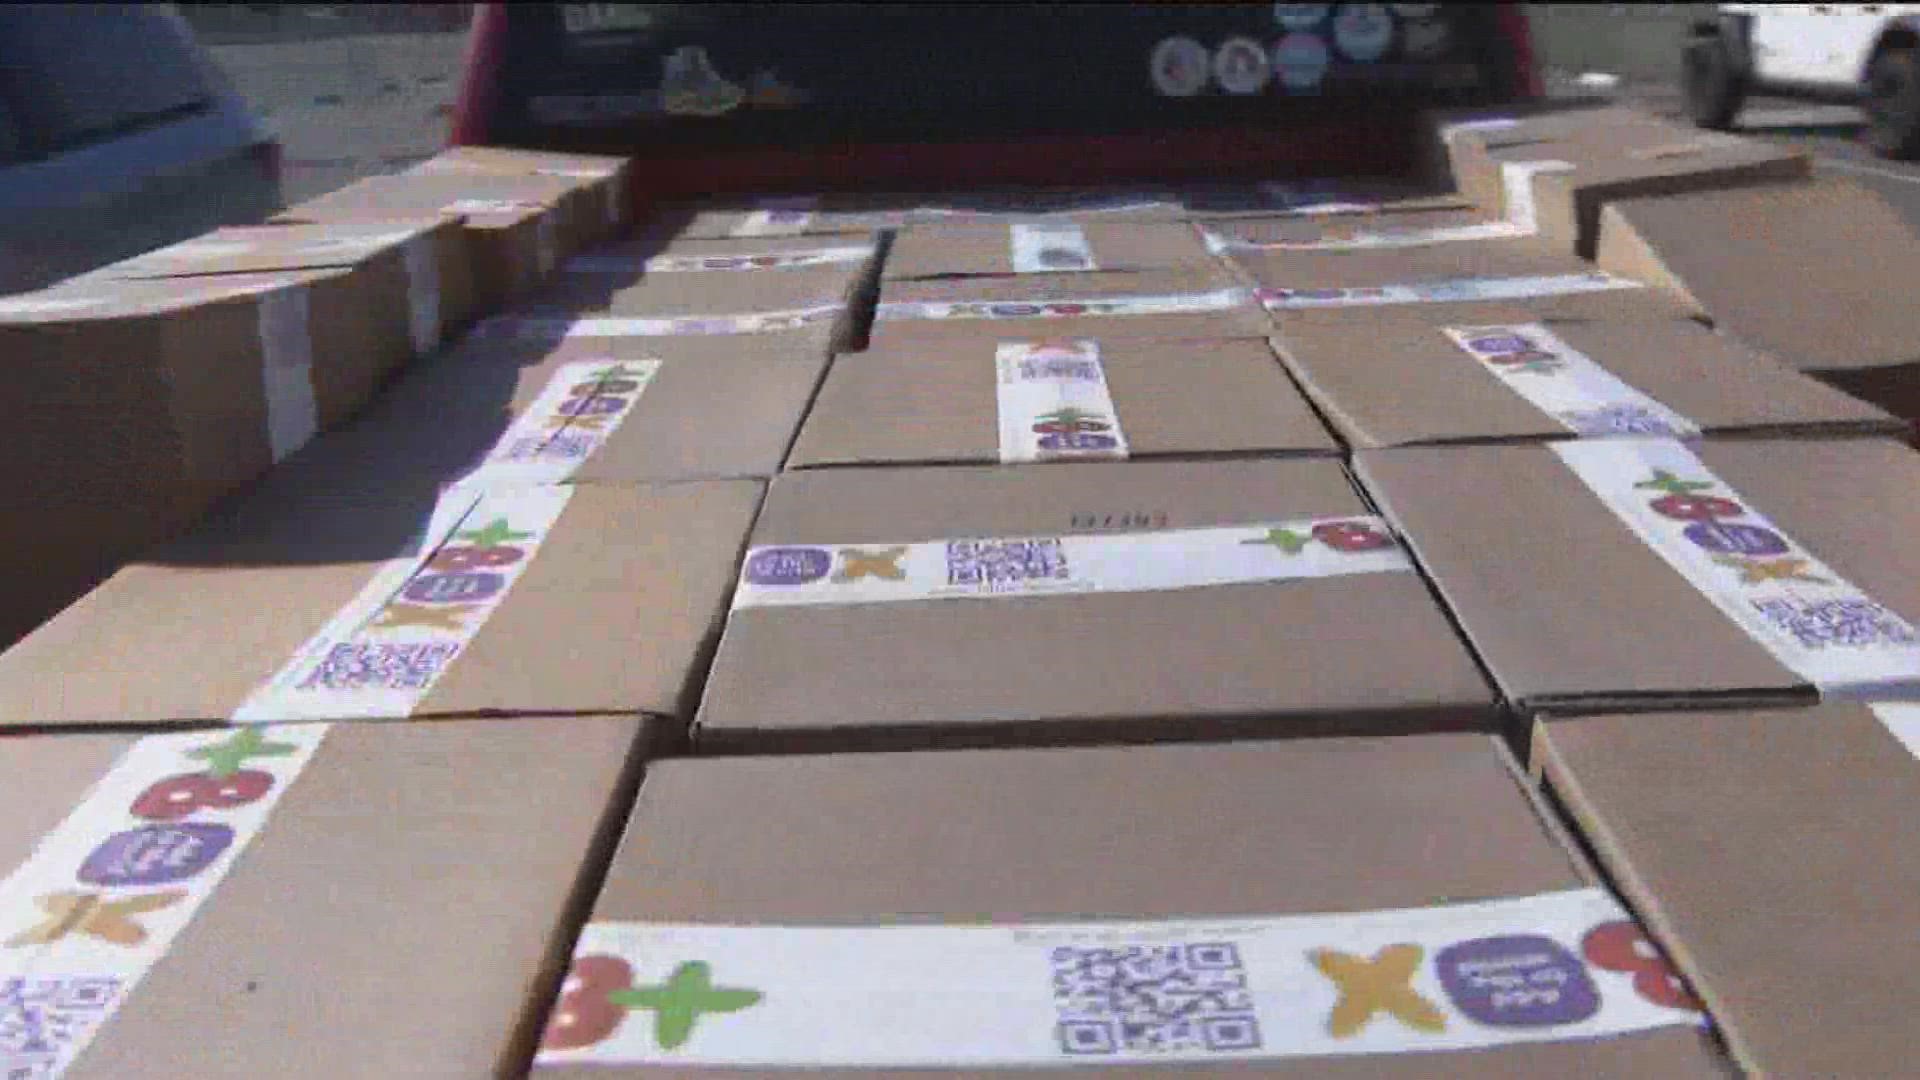 Vista Unified School District and Bella Mente Academies are receiving hundreds of boxes of food for students.